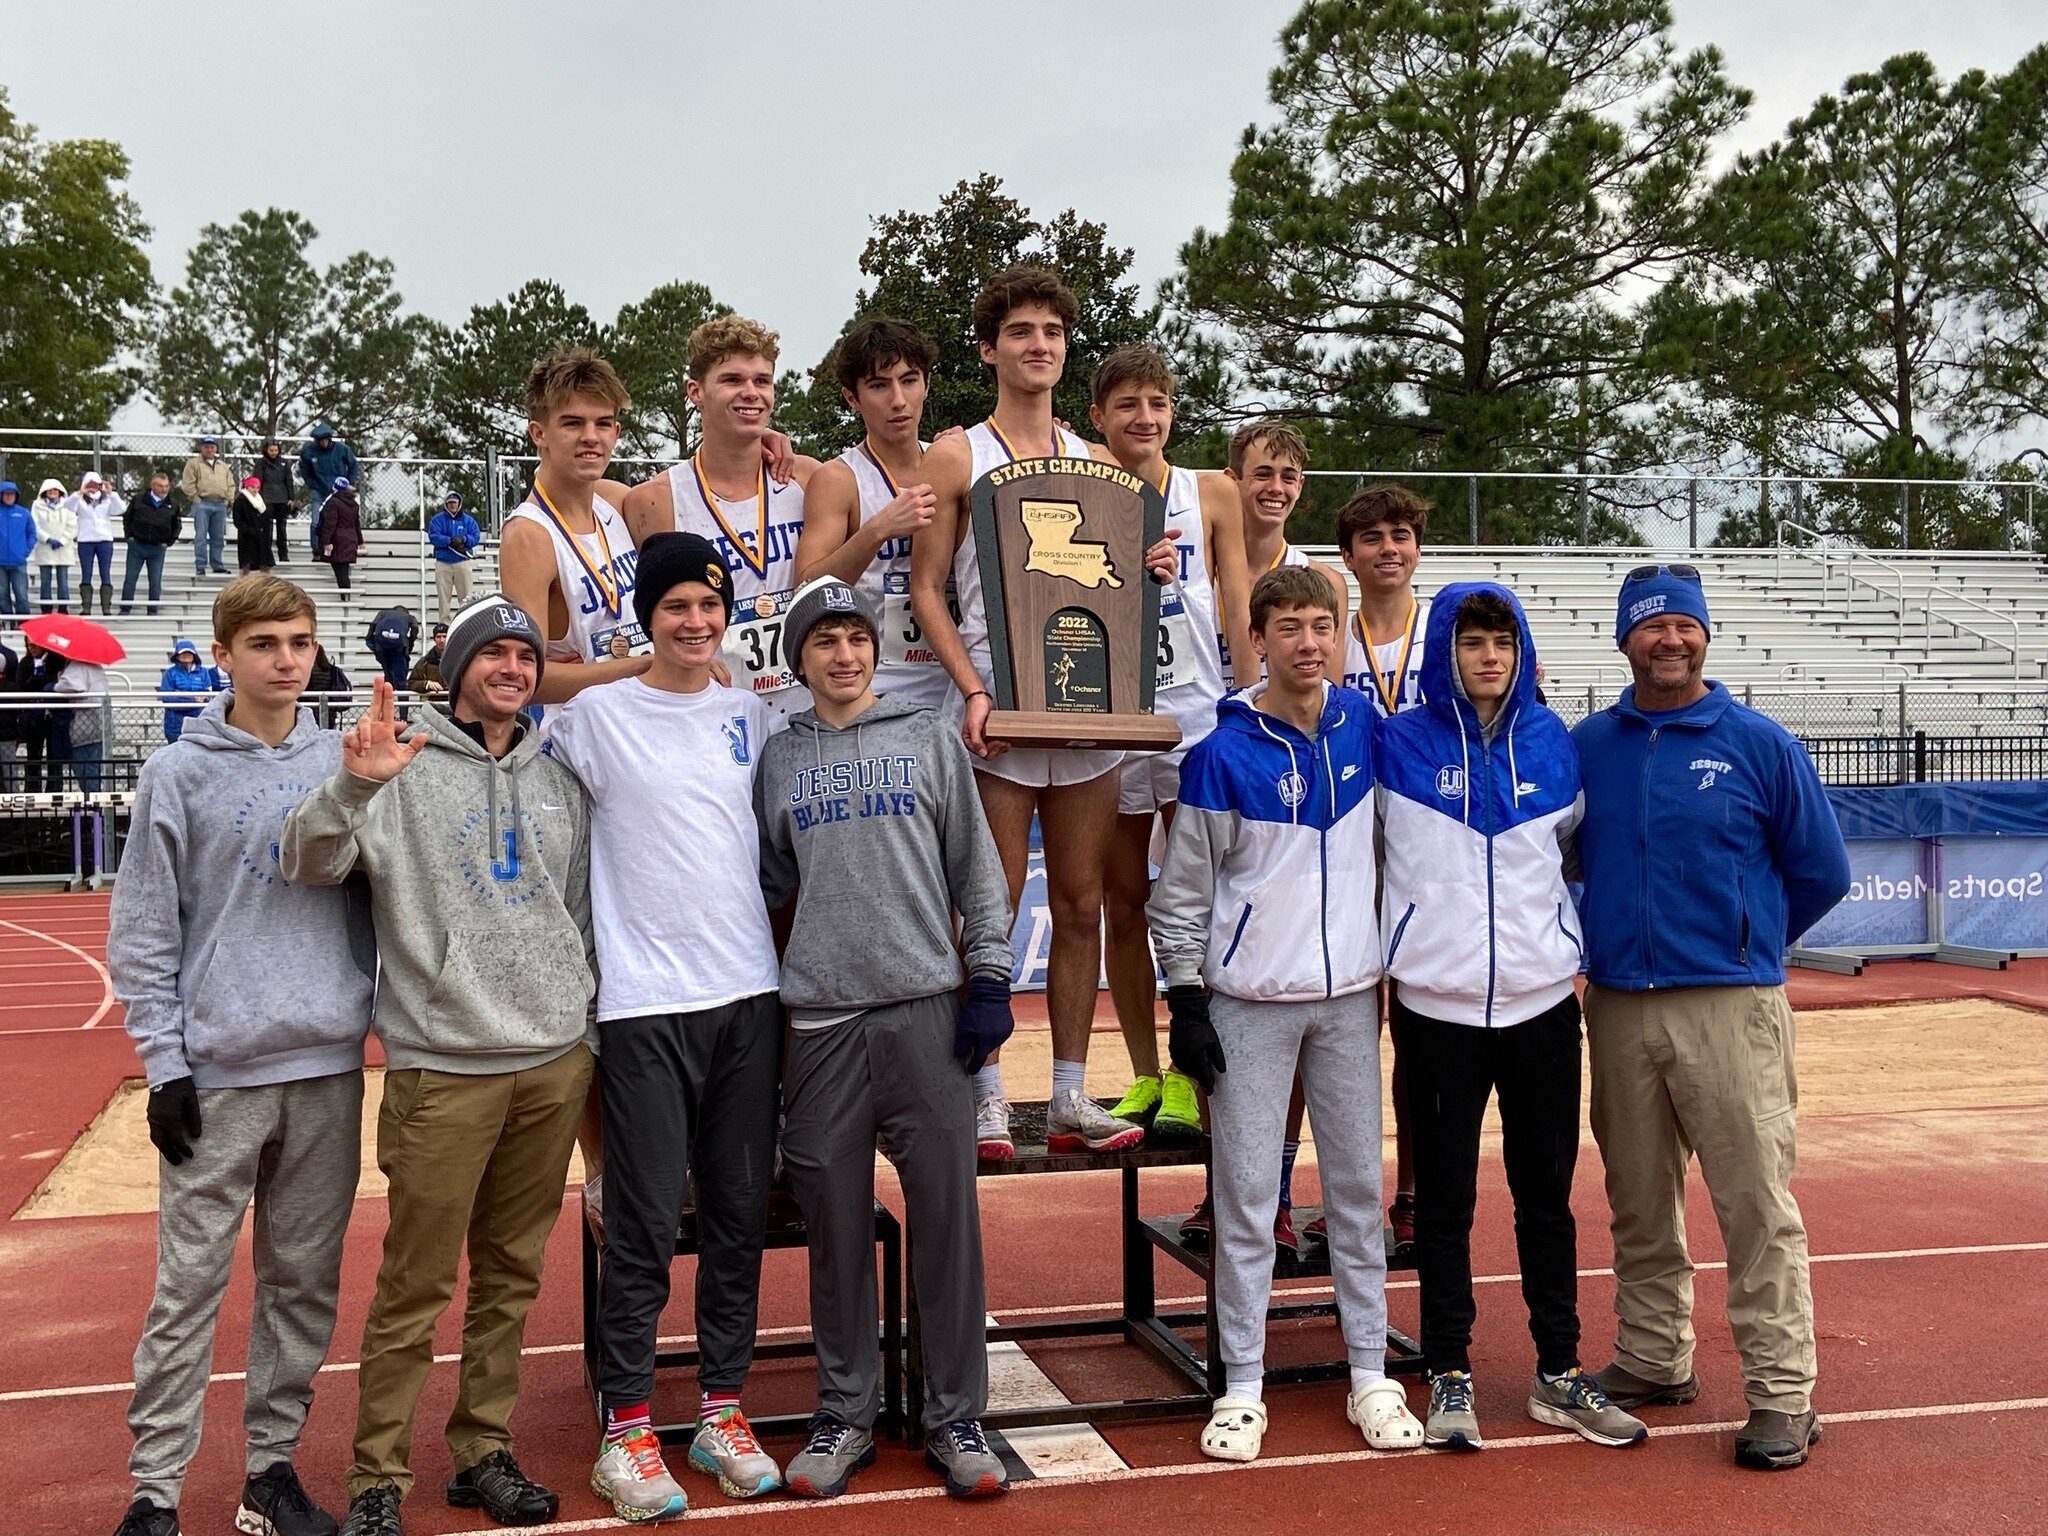 Jesuit of New Orleans swept the Top 5 finishes for a perfect score in Division 1 at LHSAA Cross Country Meet. Brother Martin, New Orleans finished second. Brother Martin is coached by Drew Haro, brother of our sideline reporter, Lauren Haro.